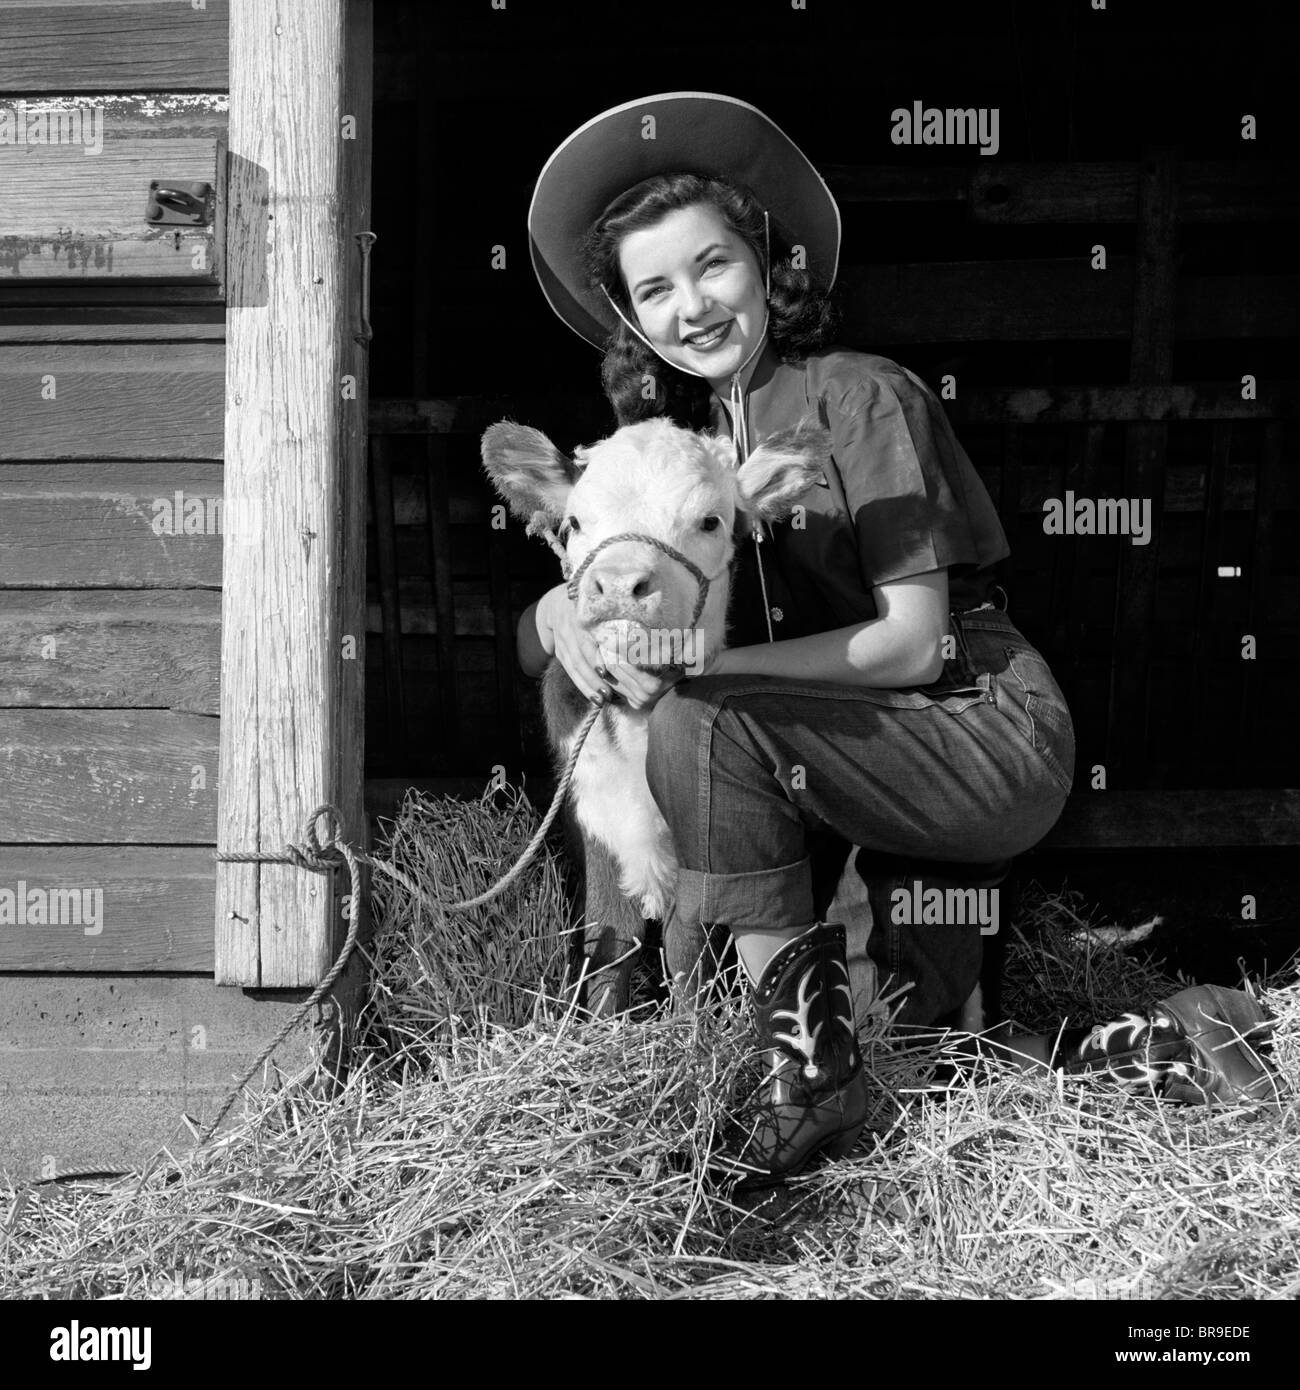 GIRL POSING WITH CALF IN STRAW FILLED STALL IN BARN Stock Photo